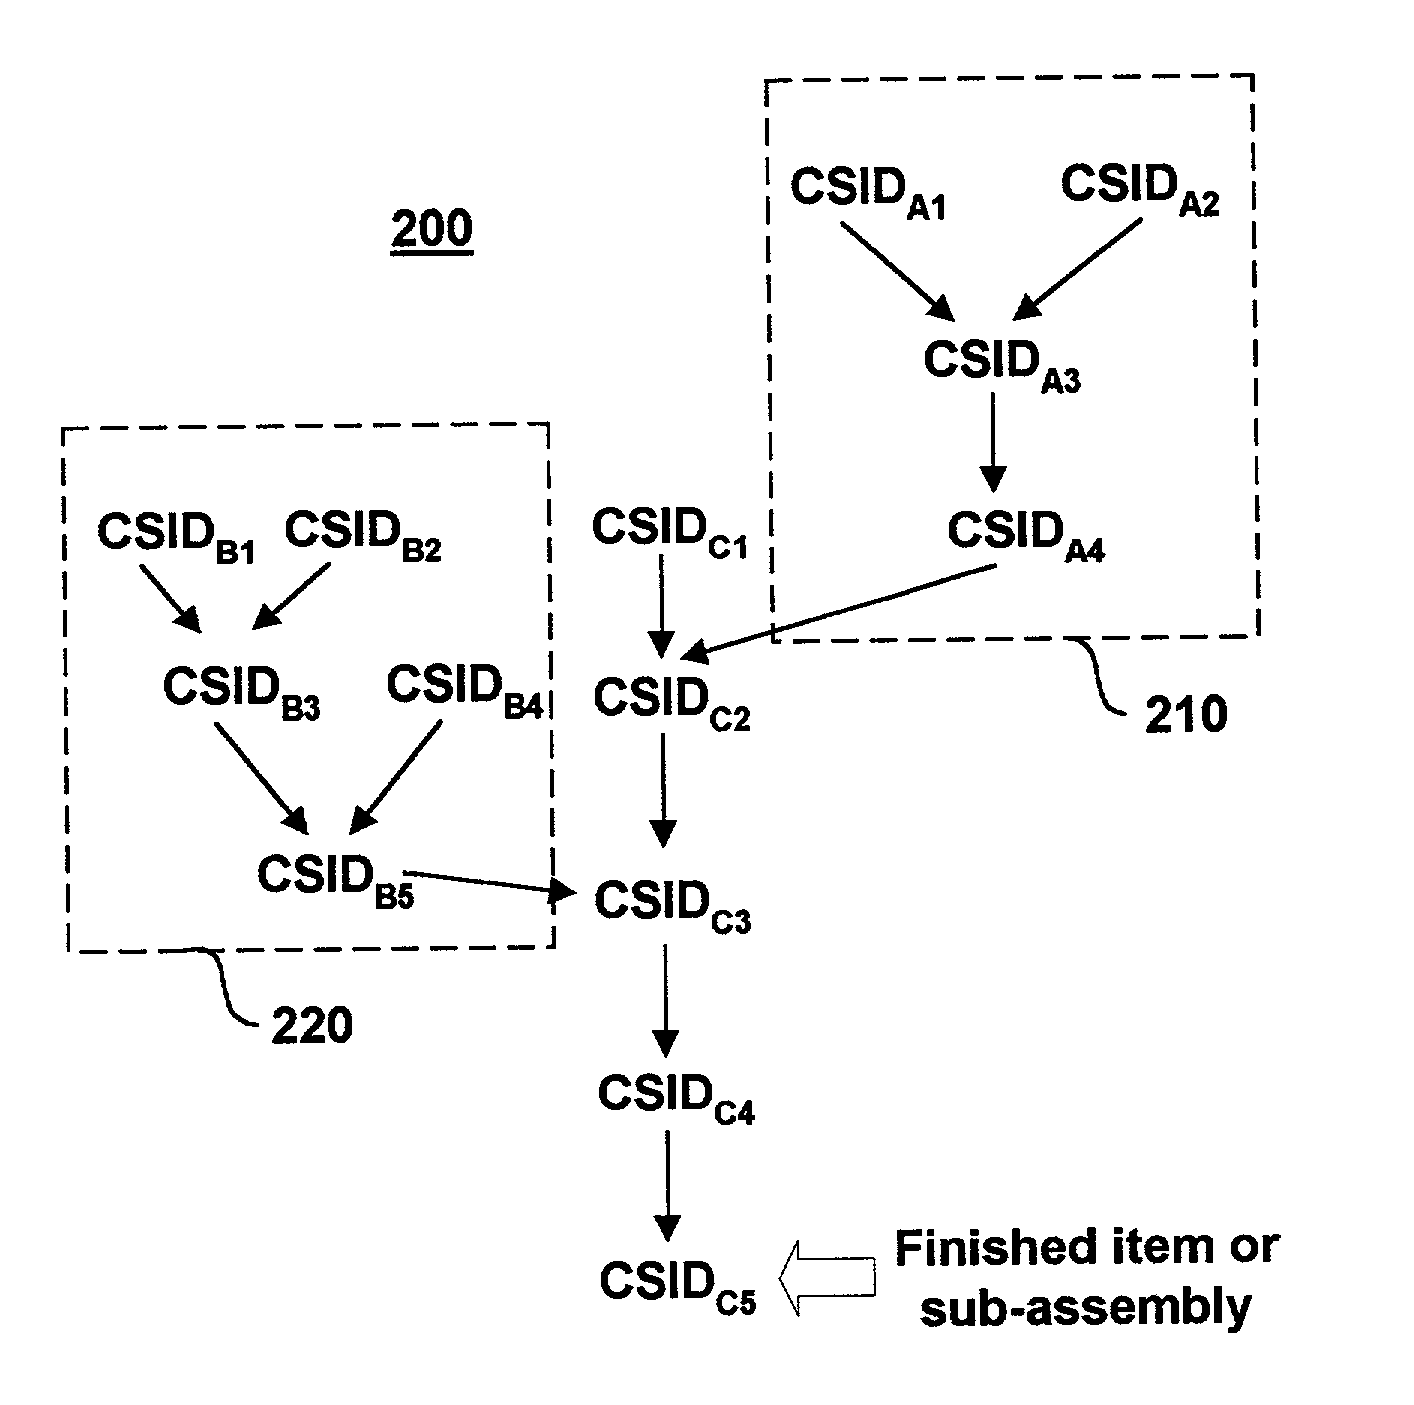 Methods and systems enabling the identification of actual costs in a transaction based financial and manufacturing environment